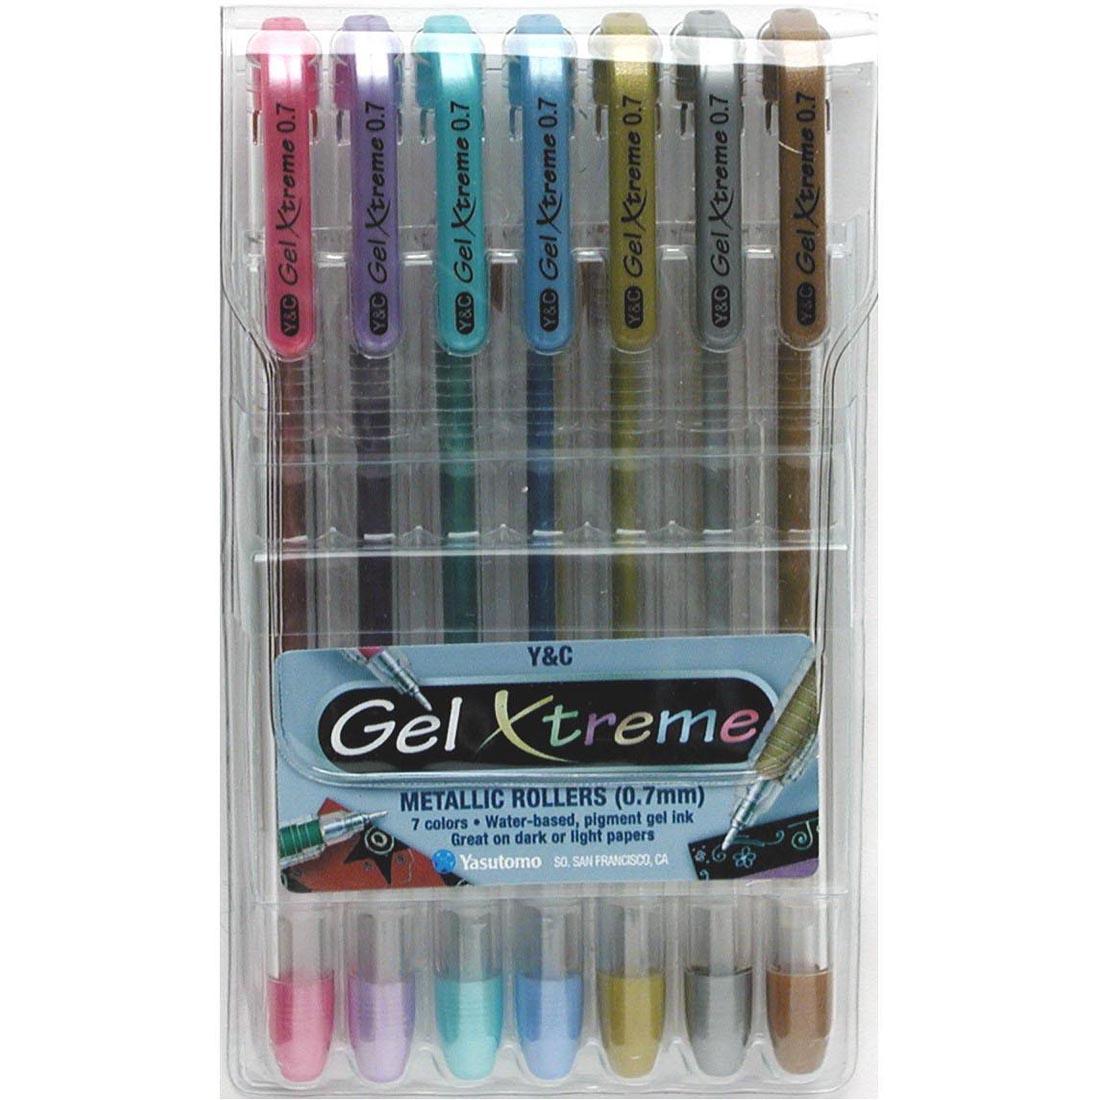 Yasutomo Metallic Gel Xtreme Pens with 7 different colors